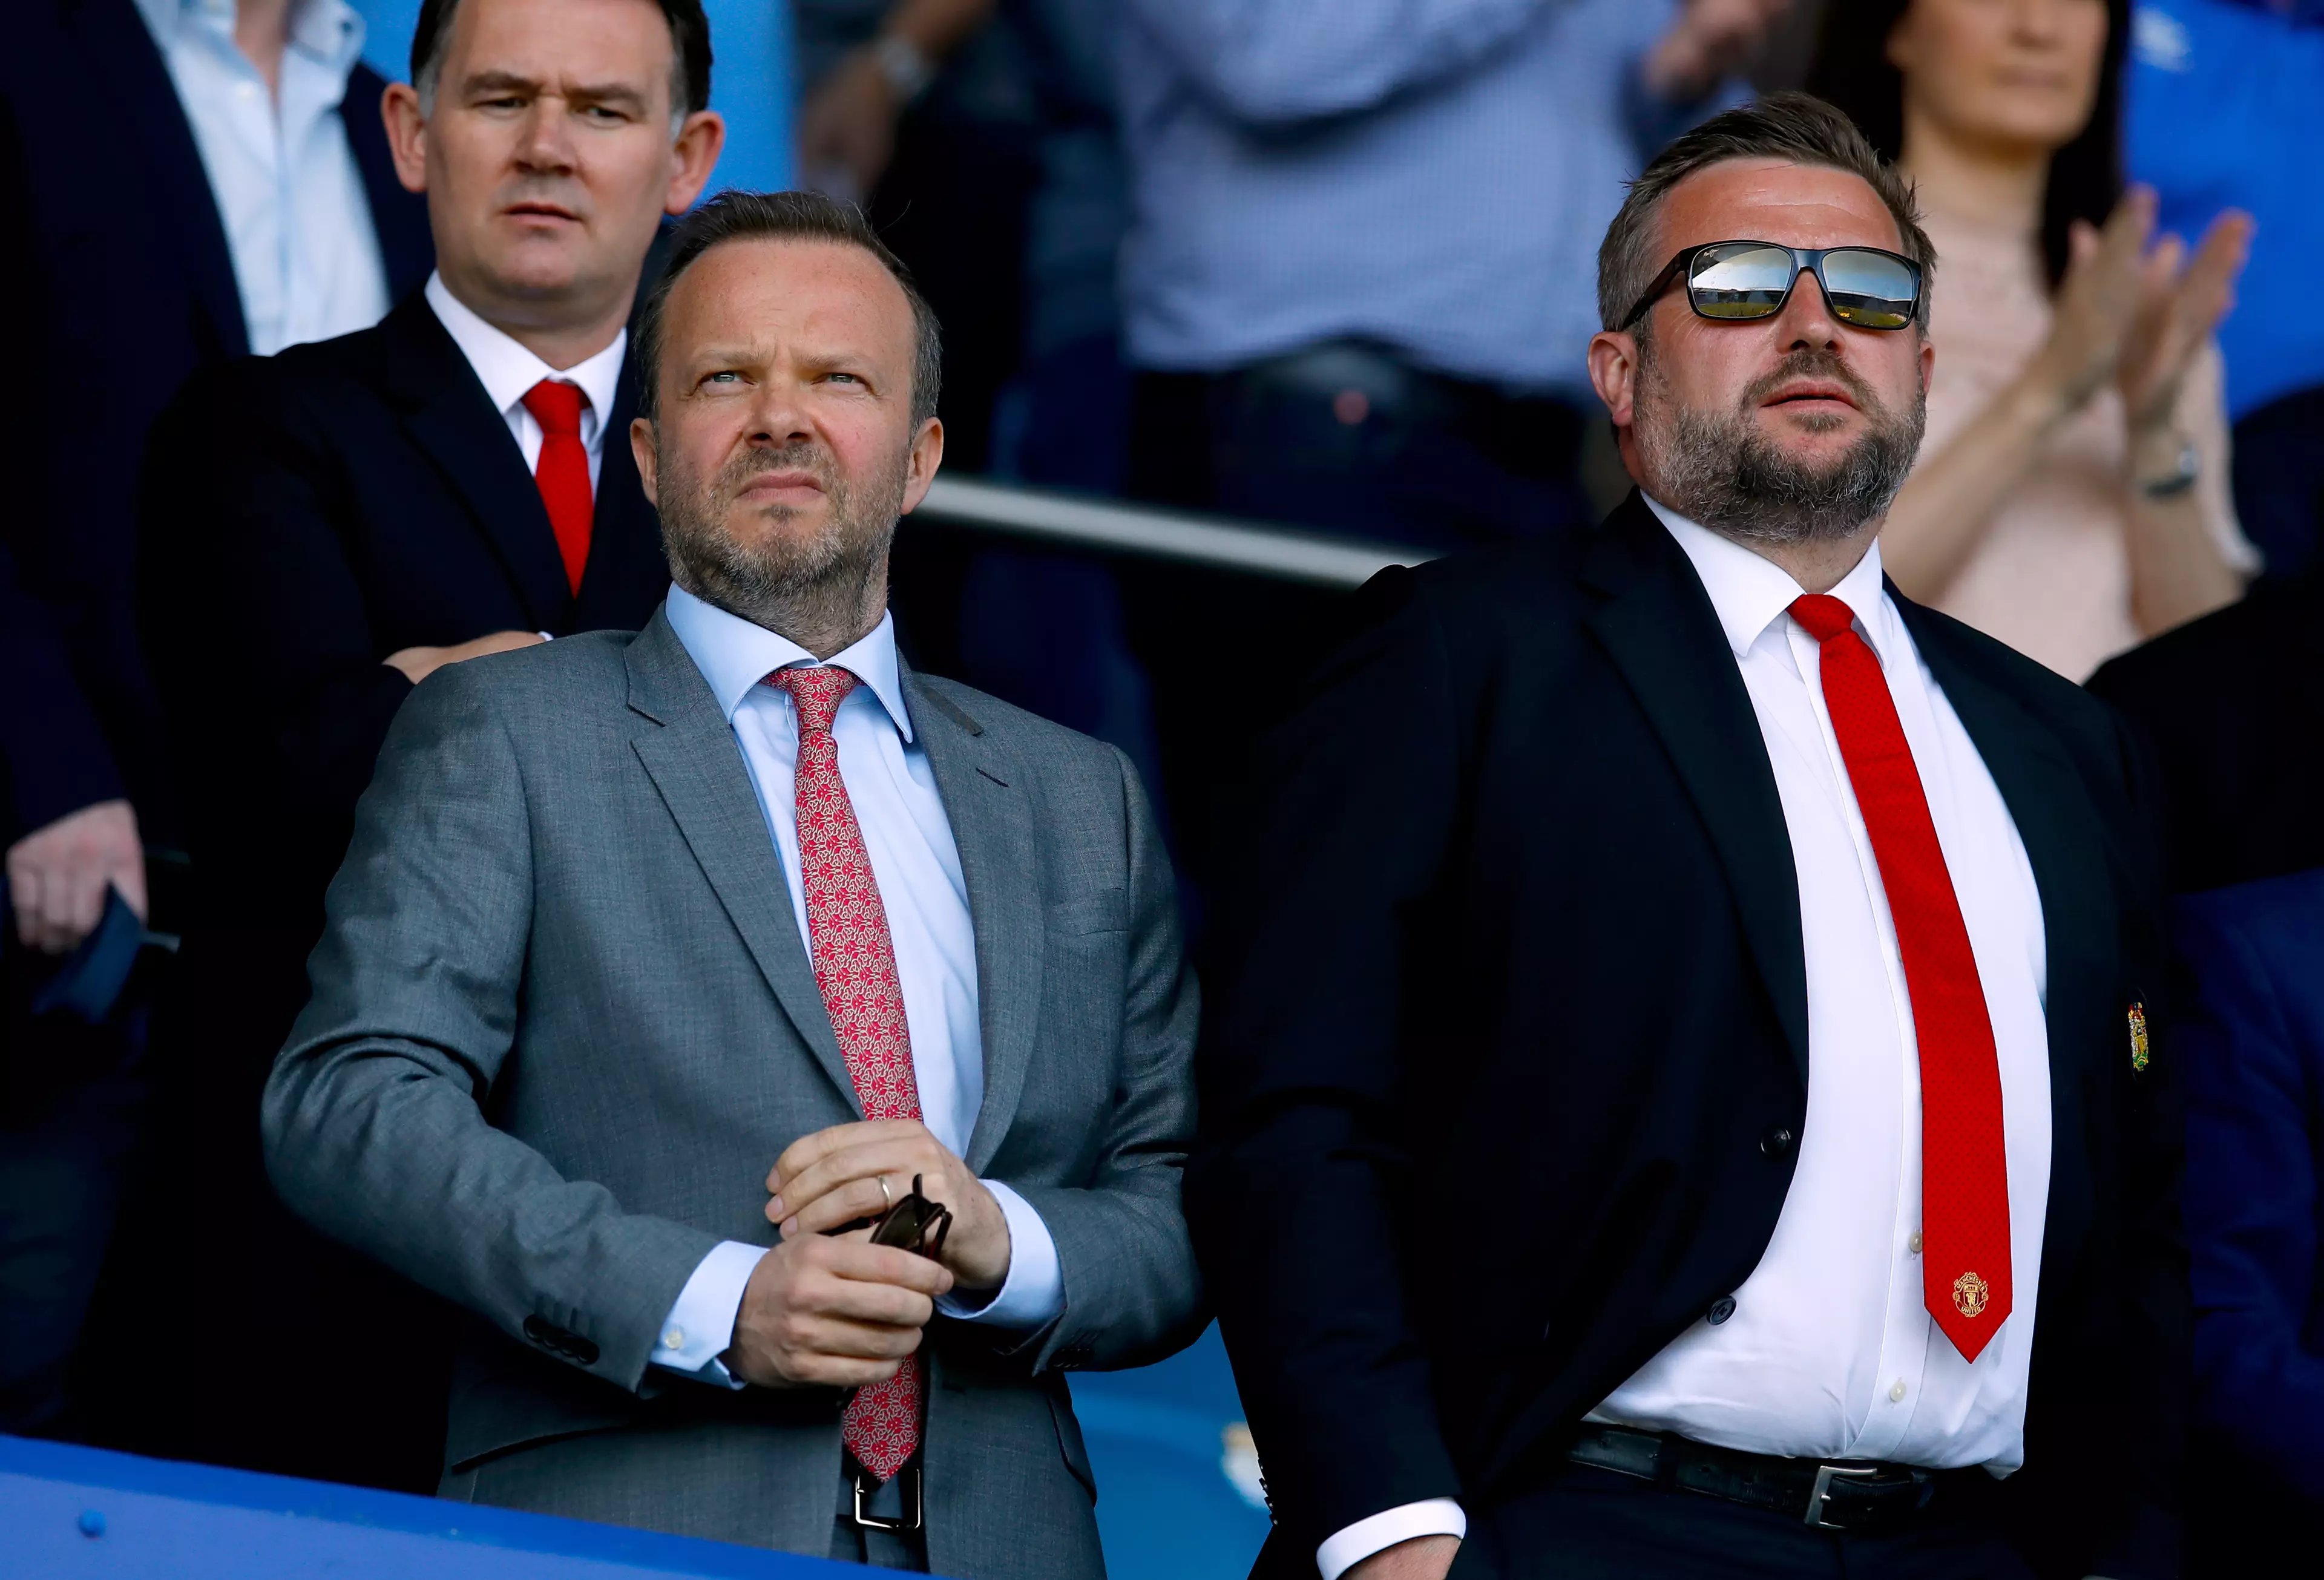 Ed Woodward has a lot of work on his hands. Image: PA Images